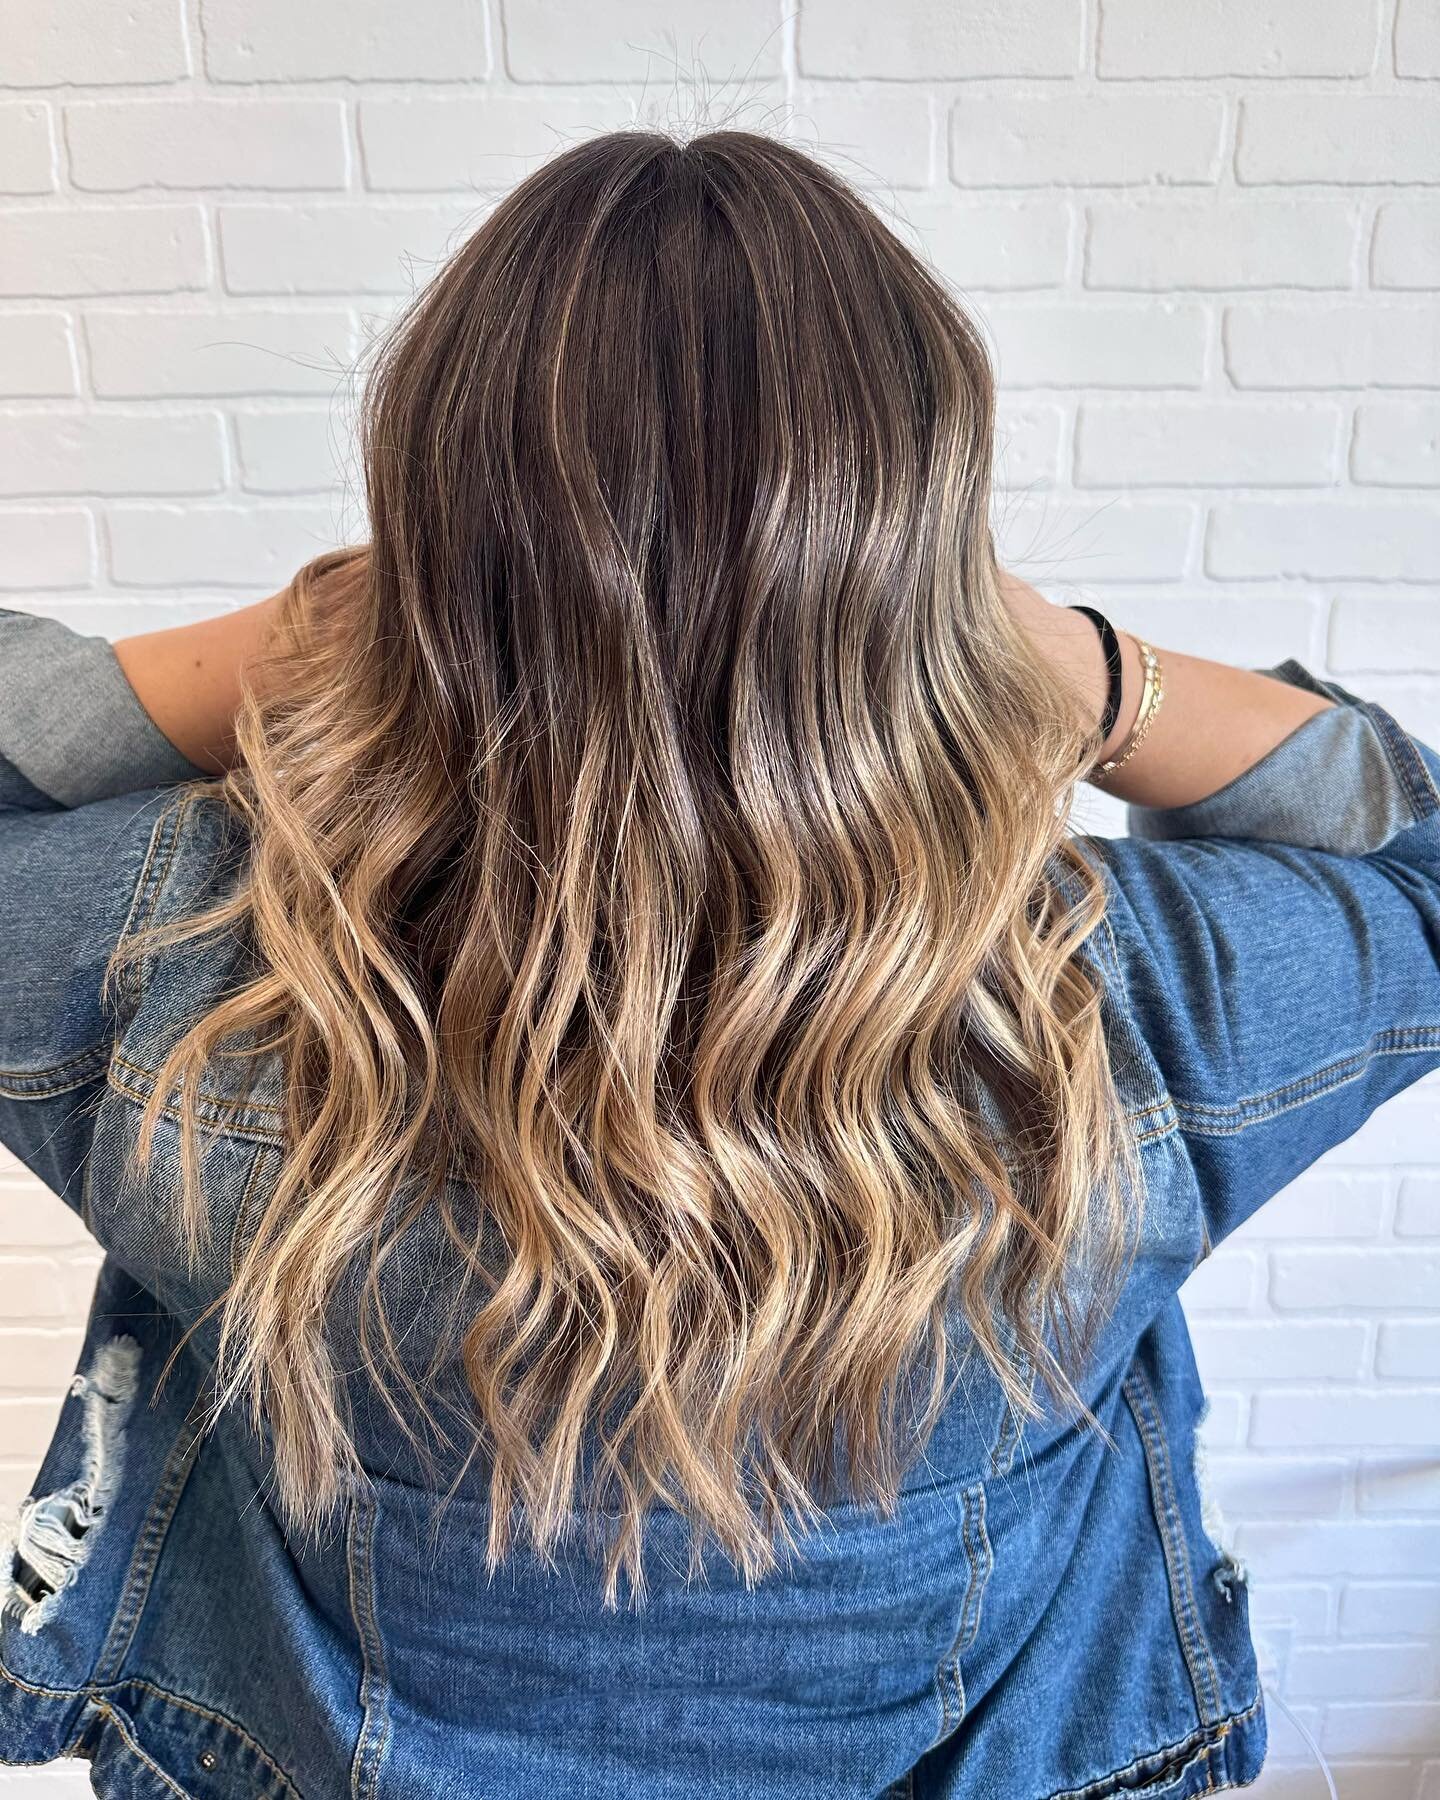 Have you booked your Holiday Transformation with @dizzle19 Spots are filling up! Contact us to reserve. Color created with our favorite @redken